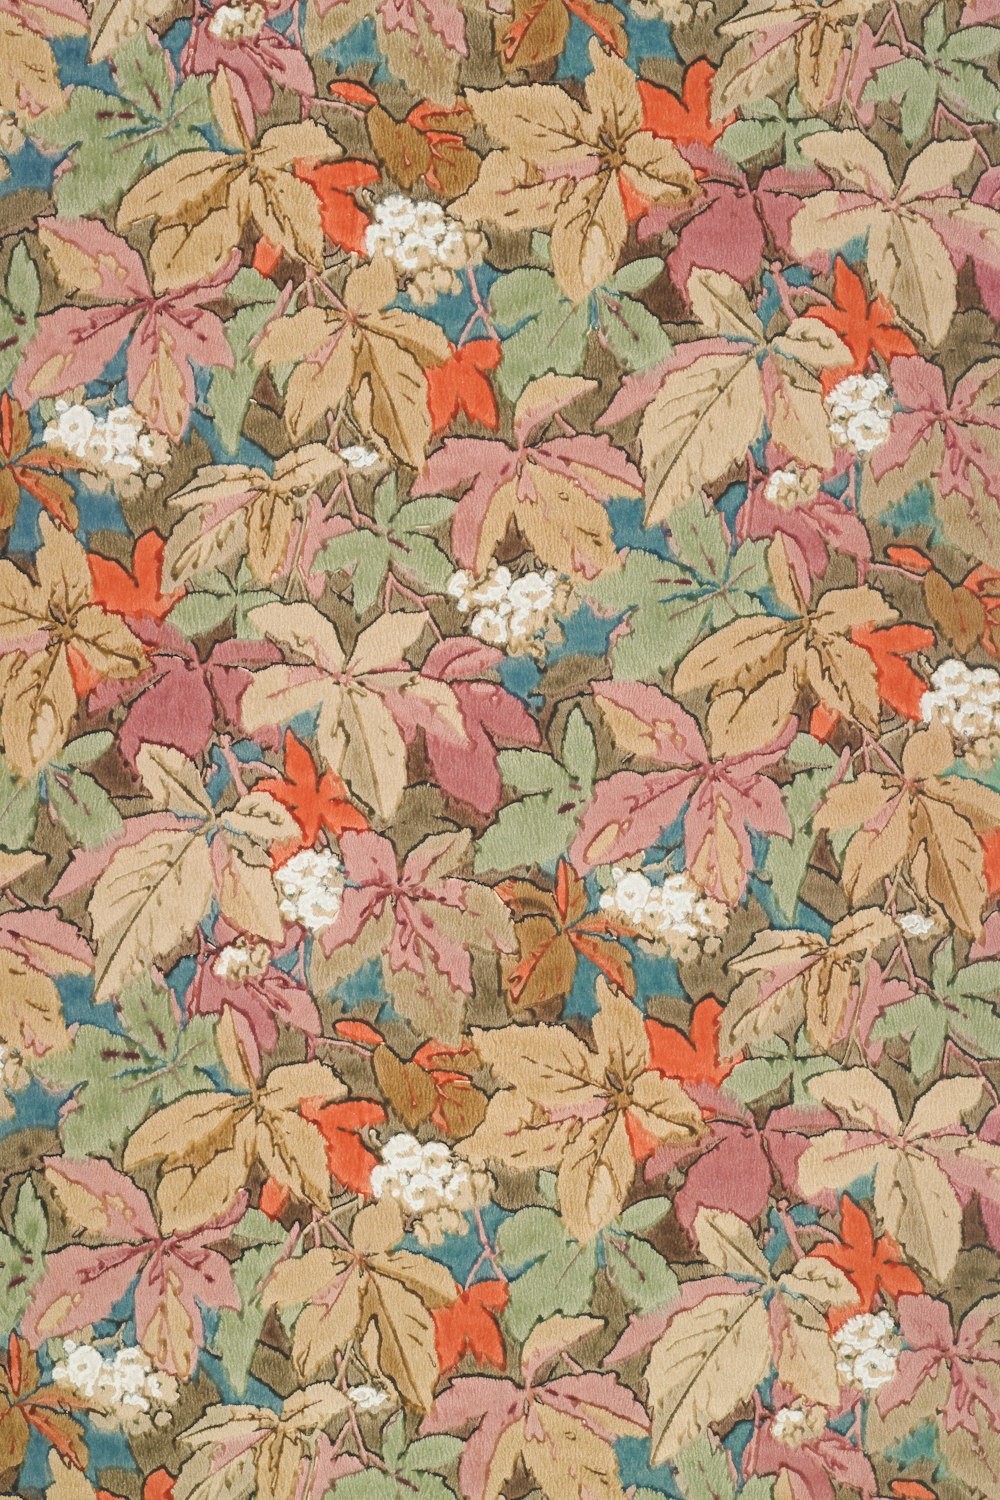 a floral pattern of leaves and flowers on a brown background